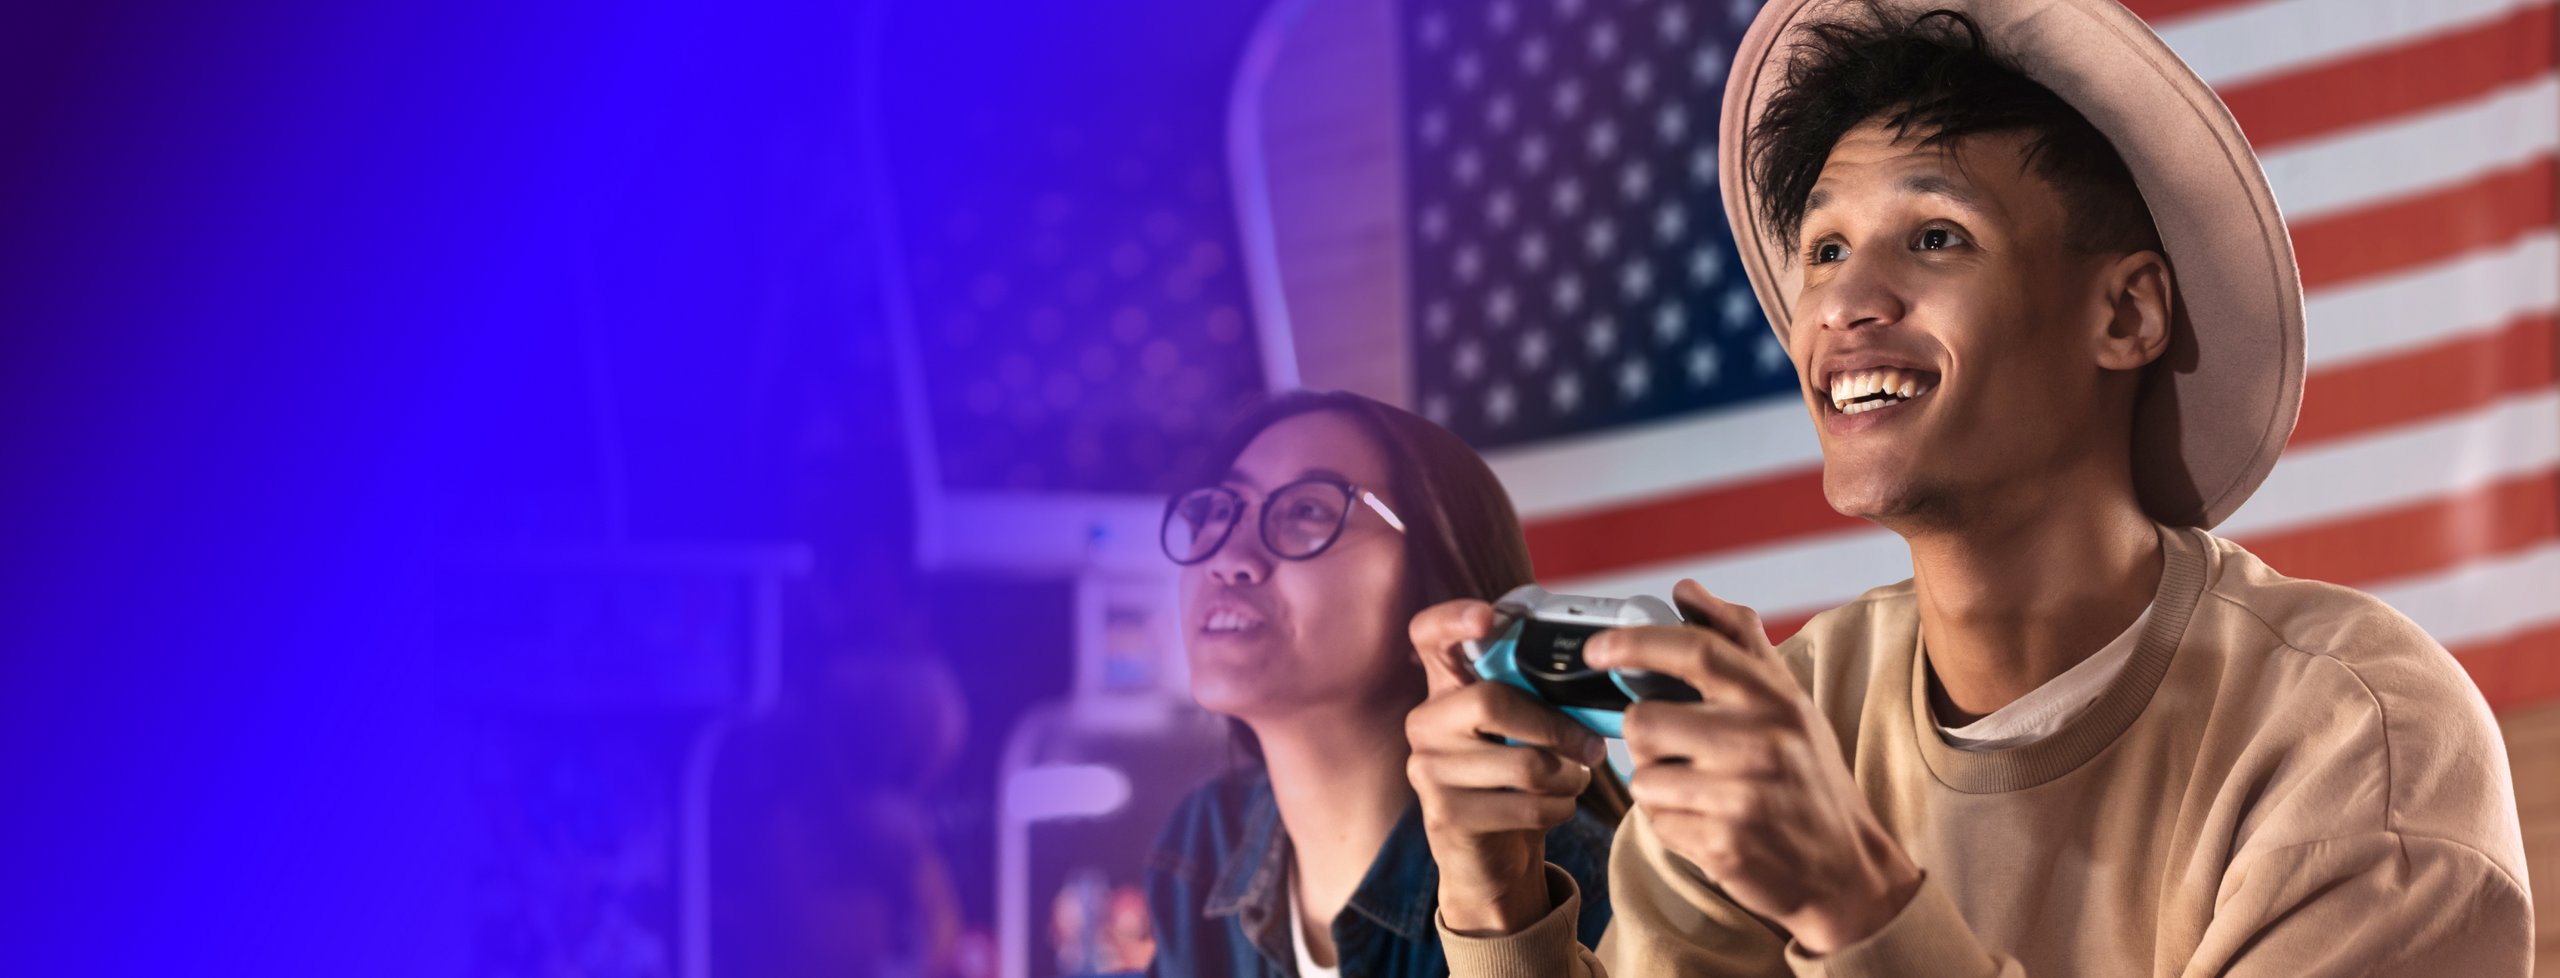 Two teenagers playing a video game with the USA flag behind.